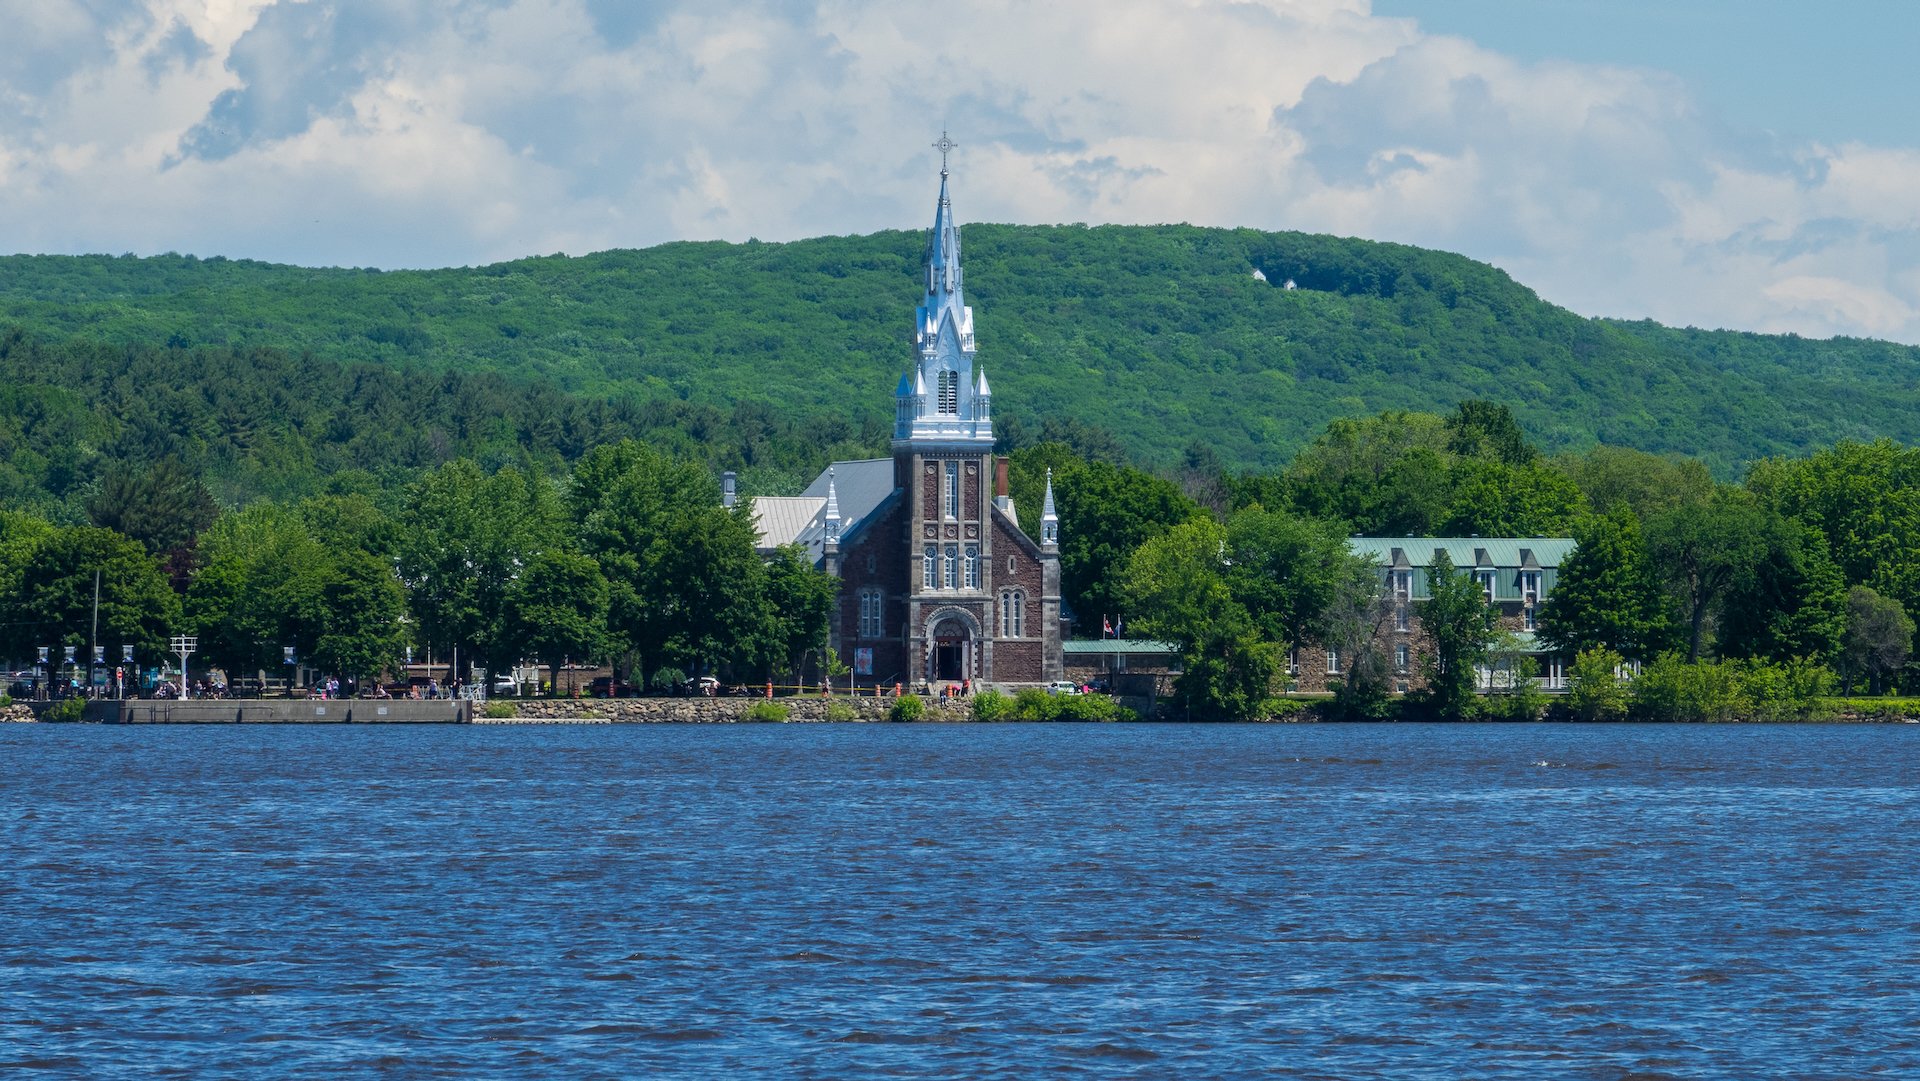  The town of Oka, from the ferry. The first of many churches with shiny steeples.  